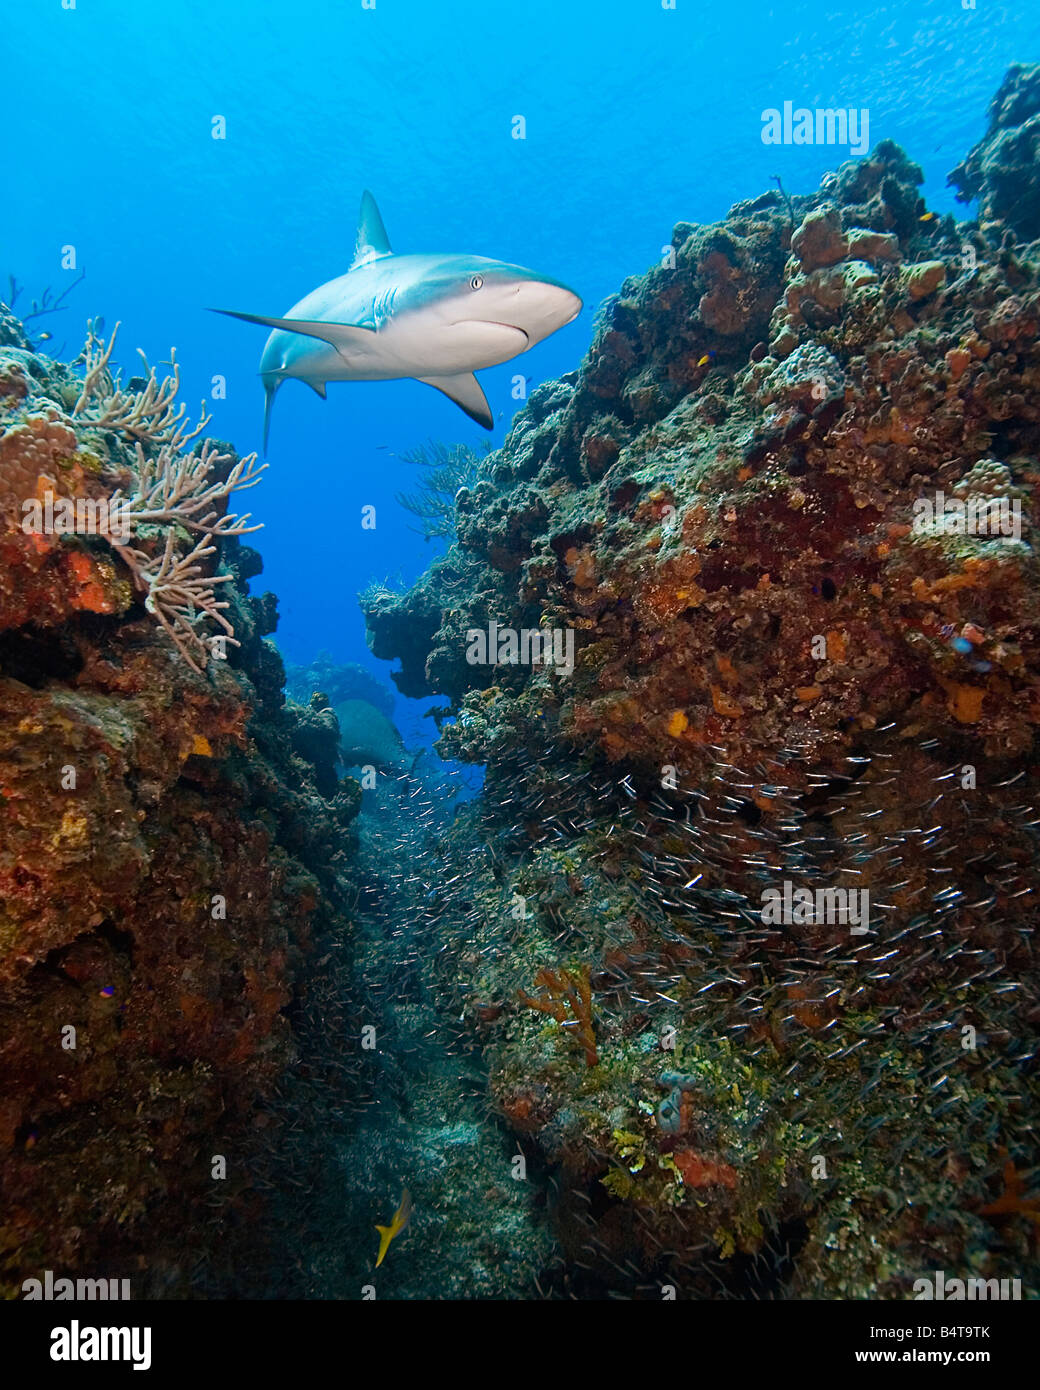 Caribbean Reef Sharks Carcharhinus perezi swimming over coral reef ledges with minnows West End Grand Bahama Atlantic Ocean Stock Photo